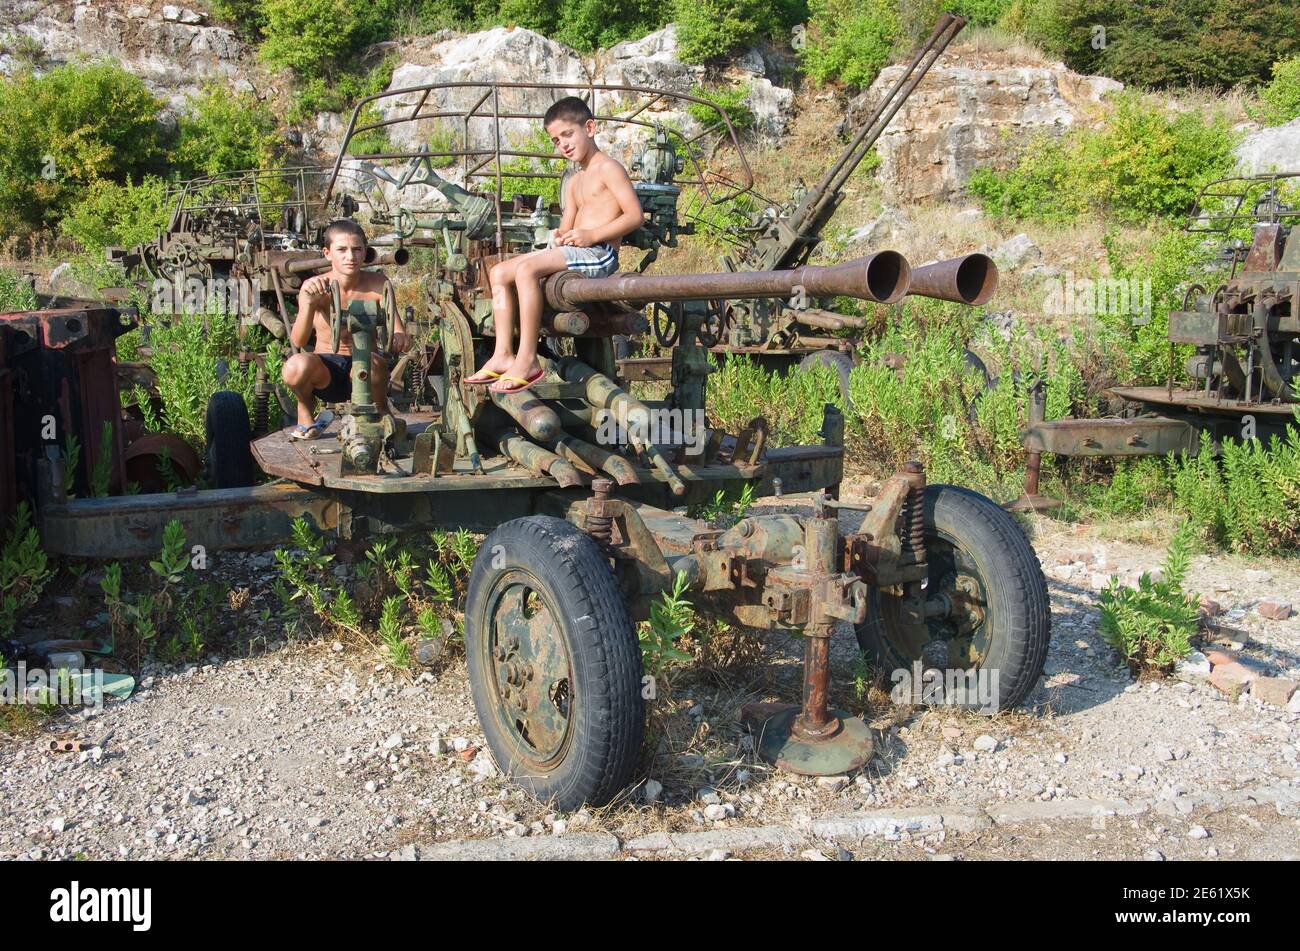 Shengjin, Albania - July 27, 2012: two Albanian children are playing with a piece of rusty artillery the Second World War that i Stock Photo